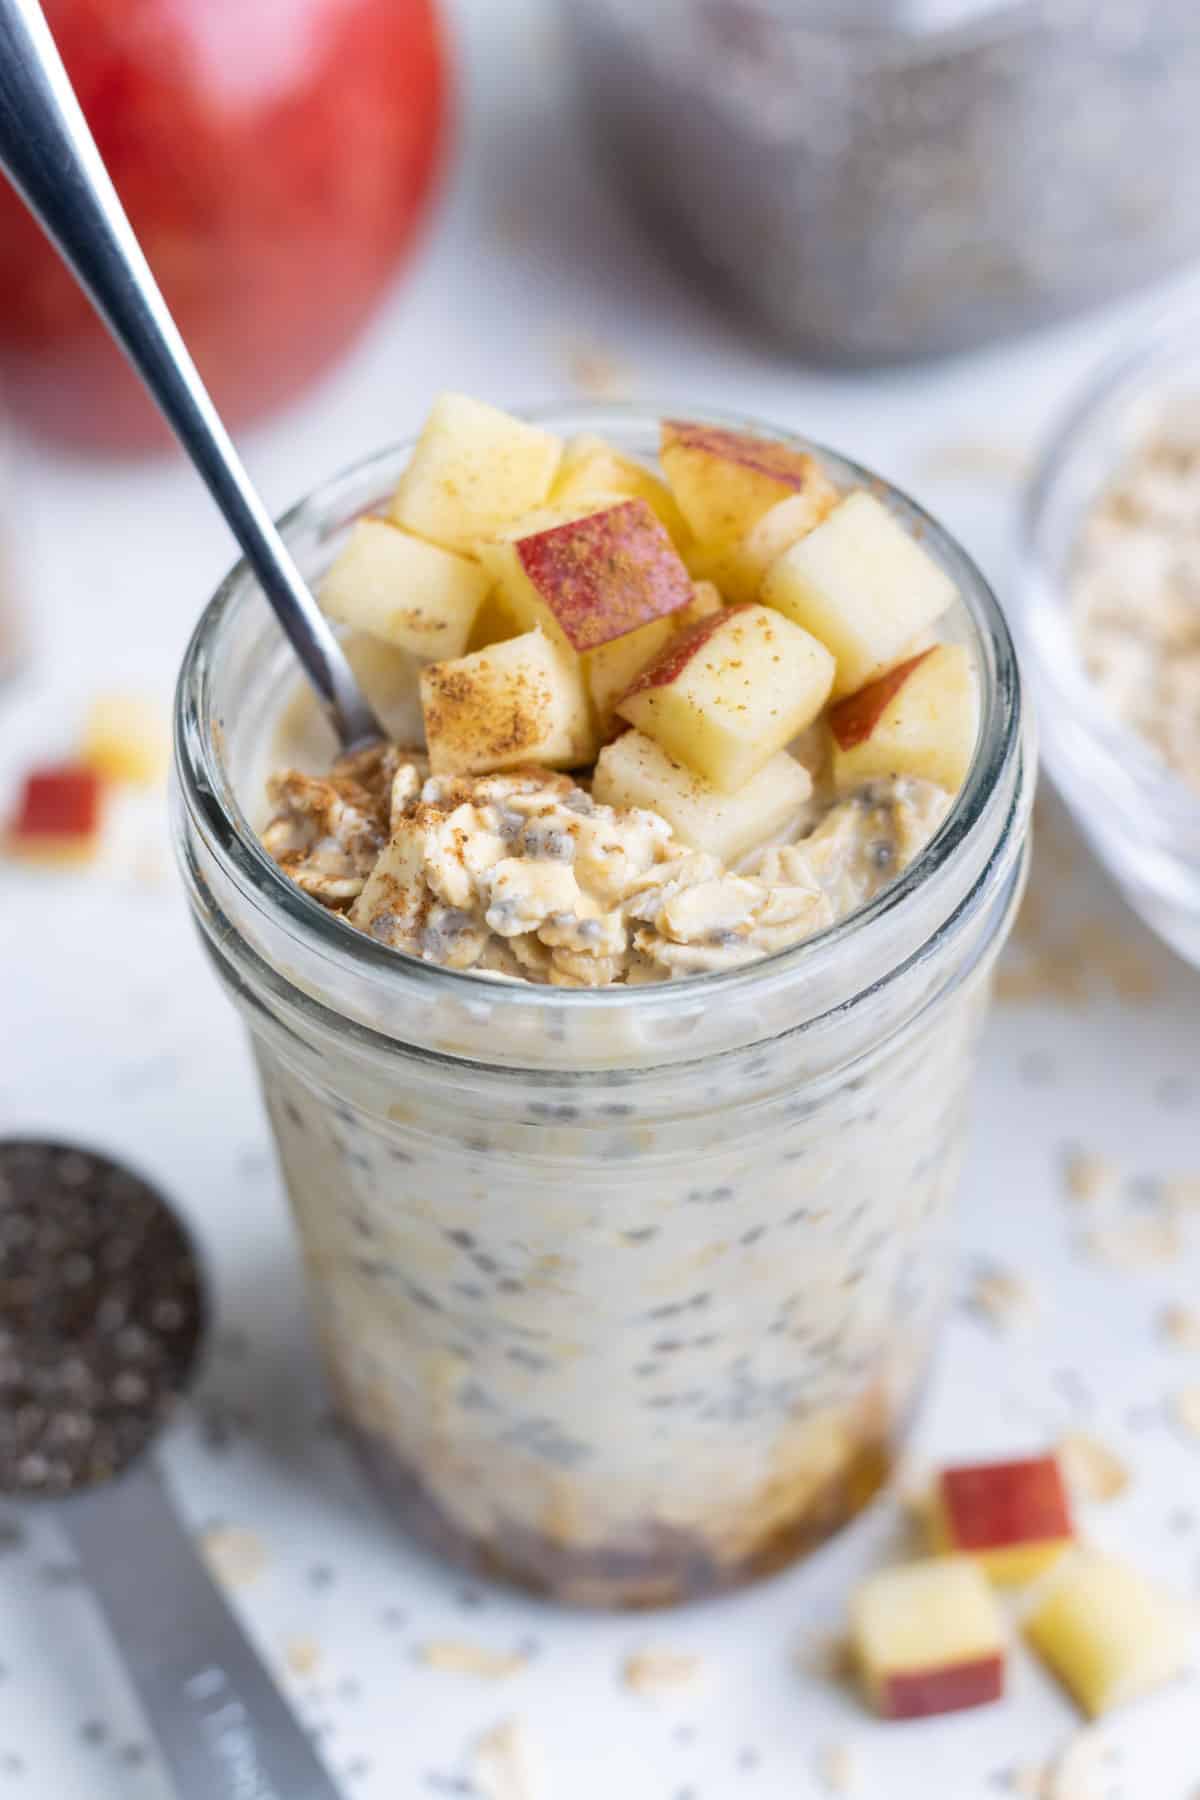 Apple overnight oats made with cinnamon in a glass with a spoon.